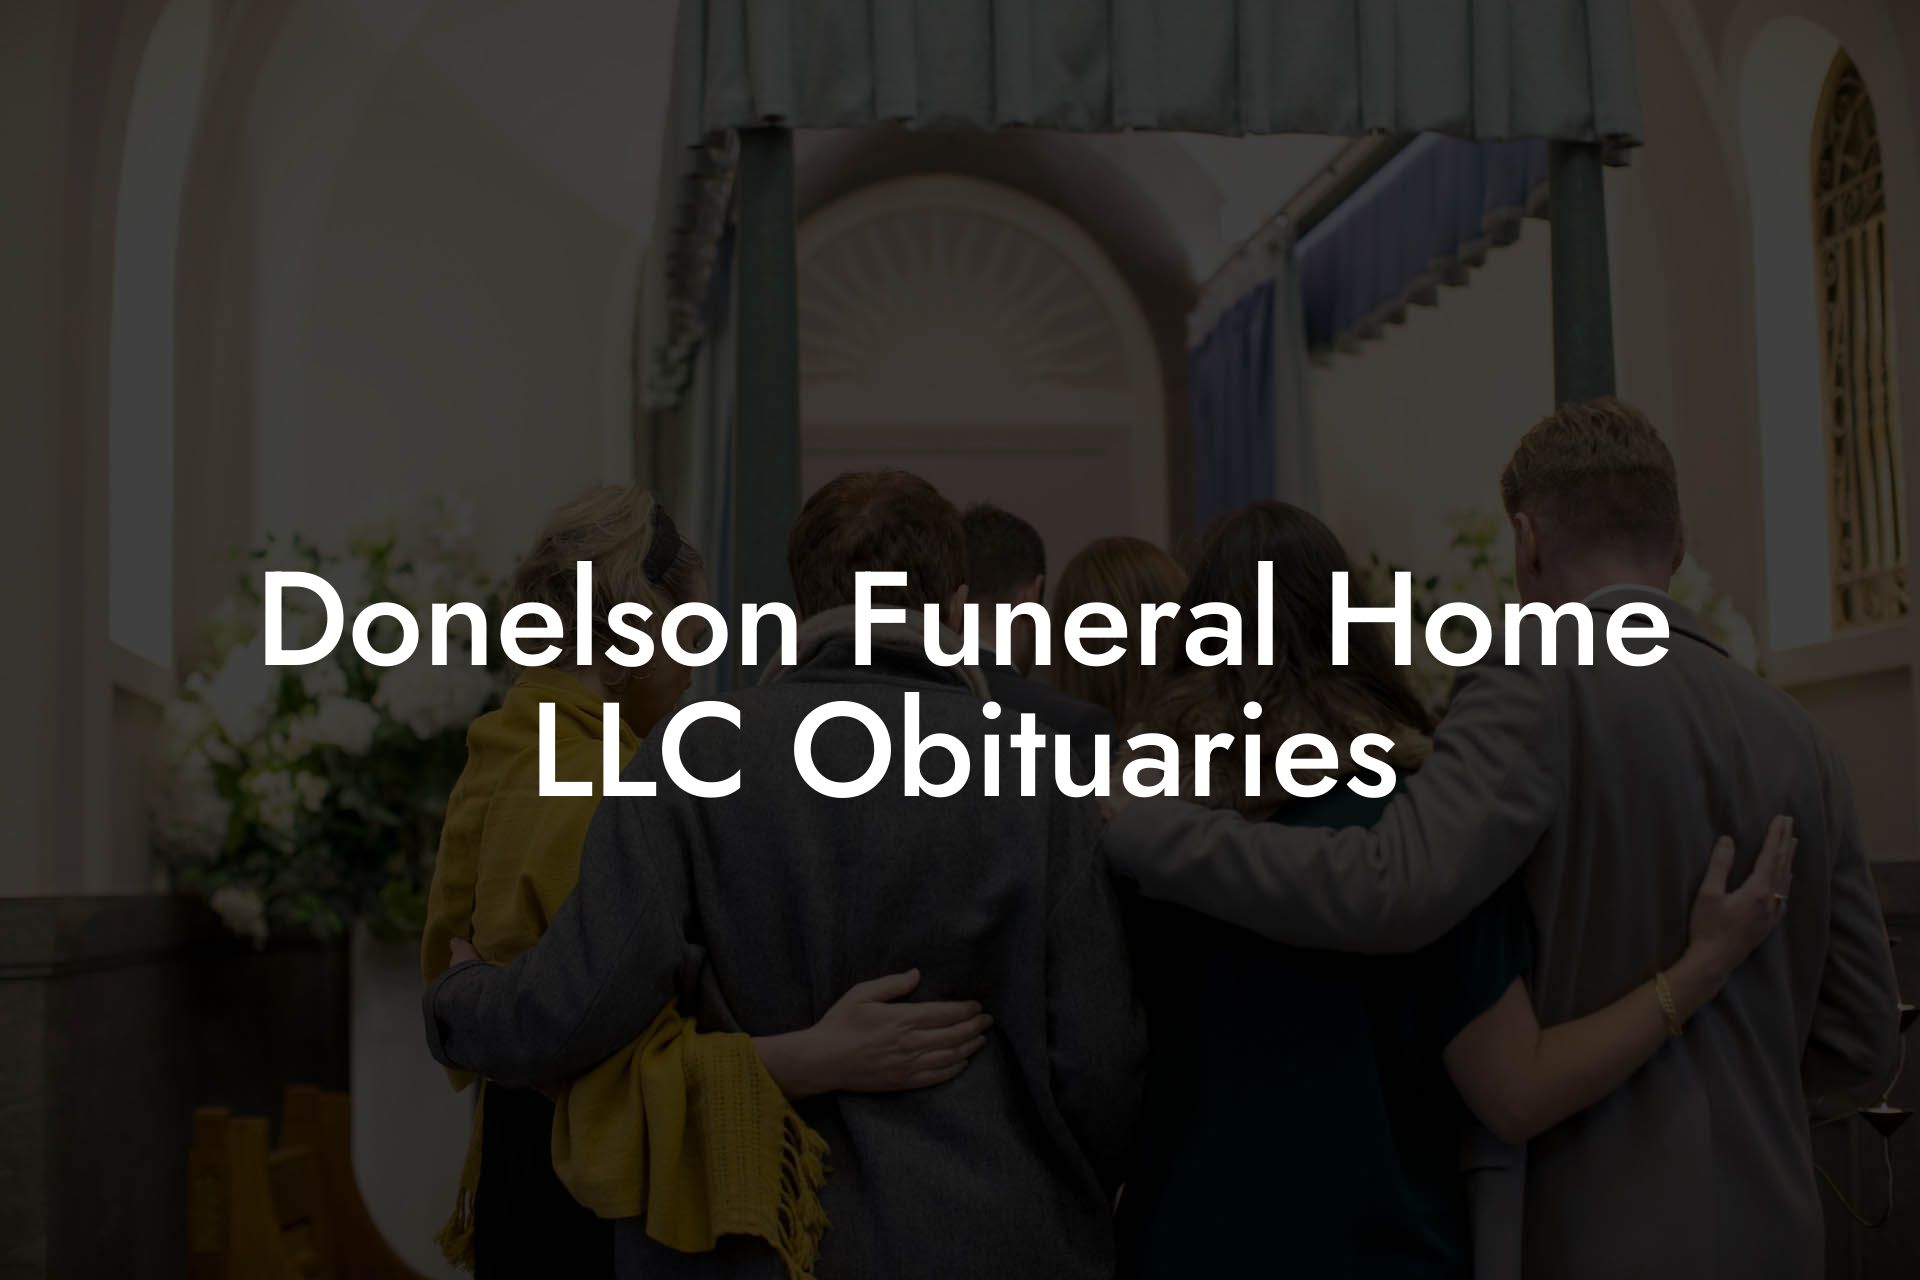 Donelson Funeral Home LLC Obituaries